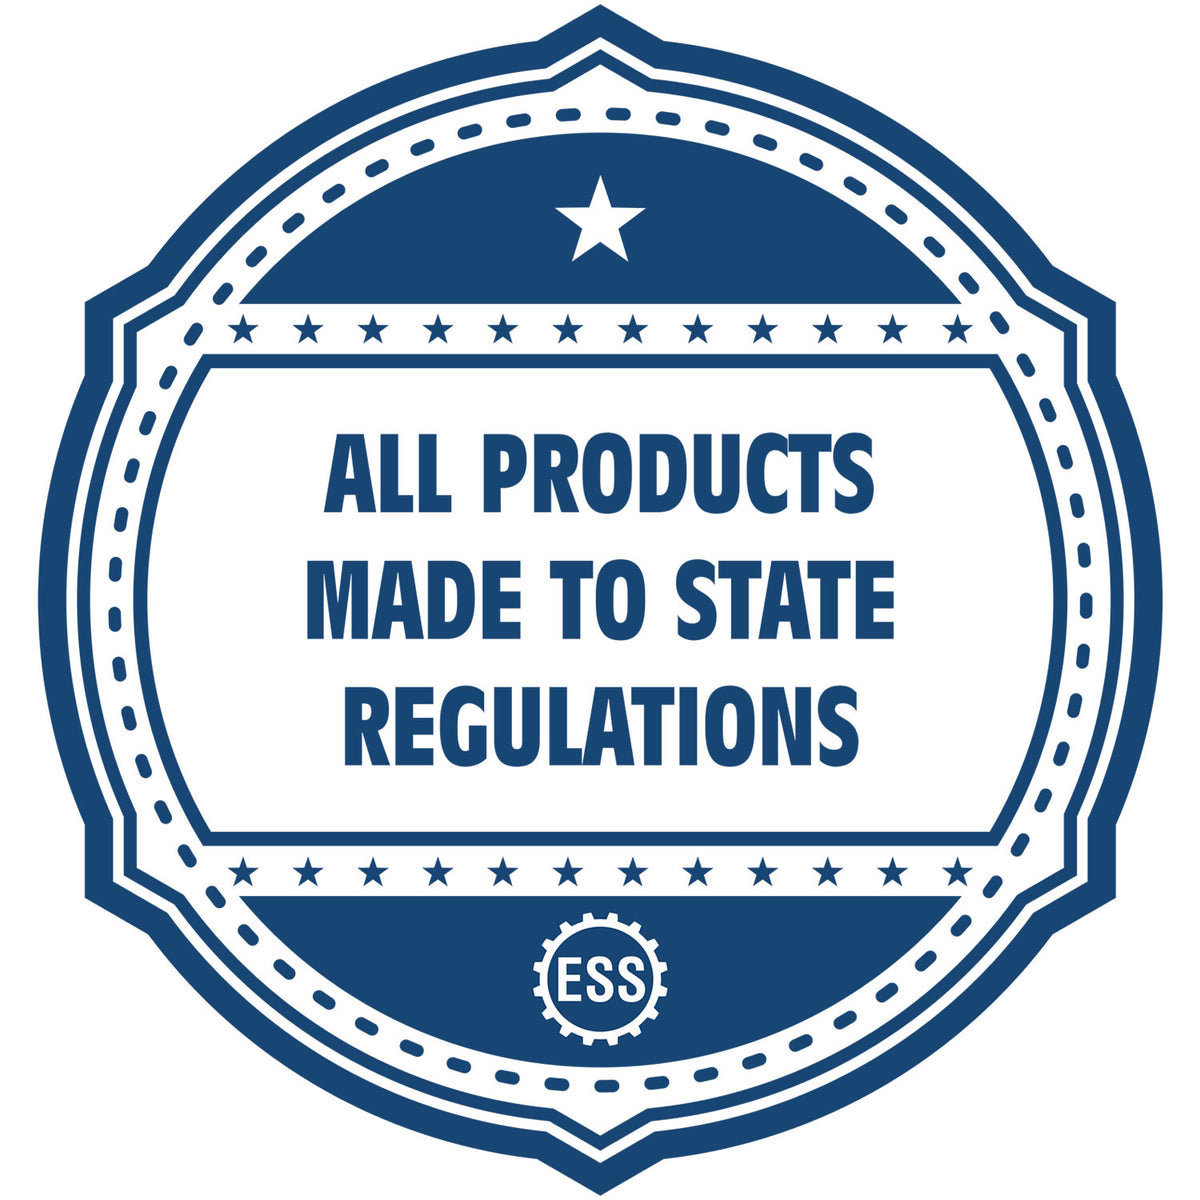 An icon or badge element for the Self-Inking Rectangular Colorado Notary Stamp showing that this product is made in compliance with state regulations.